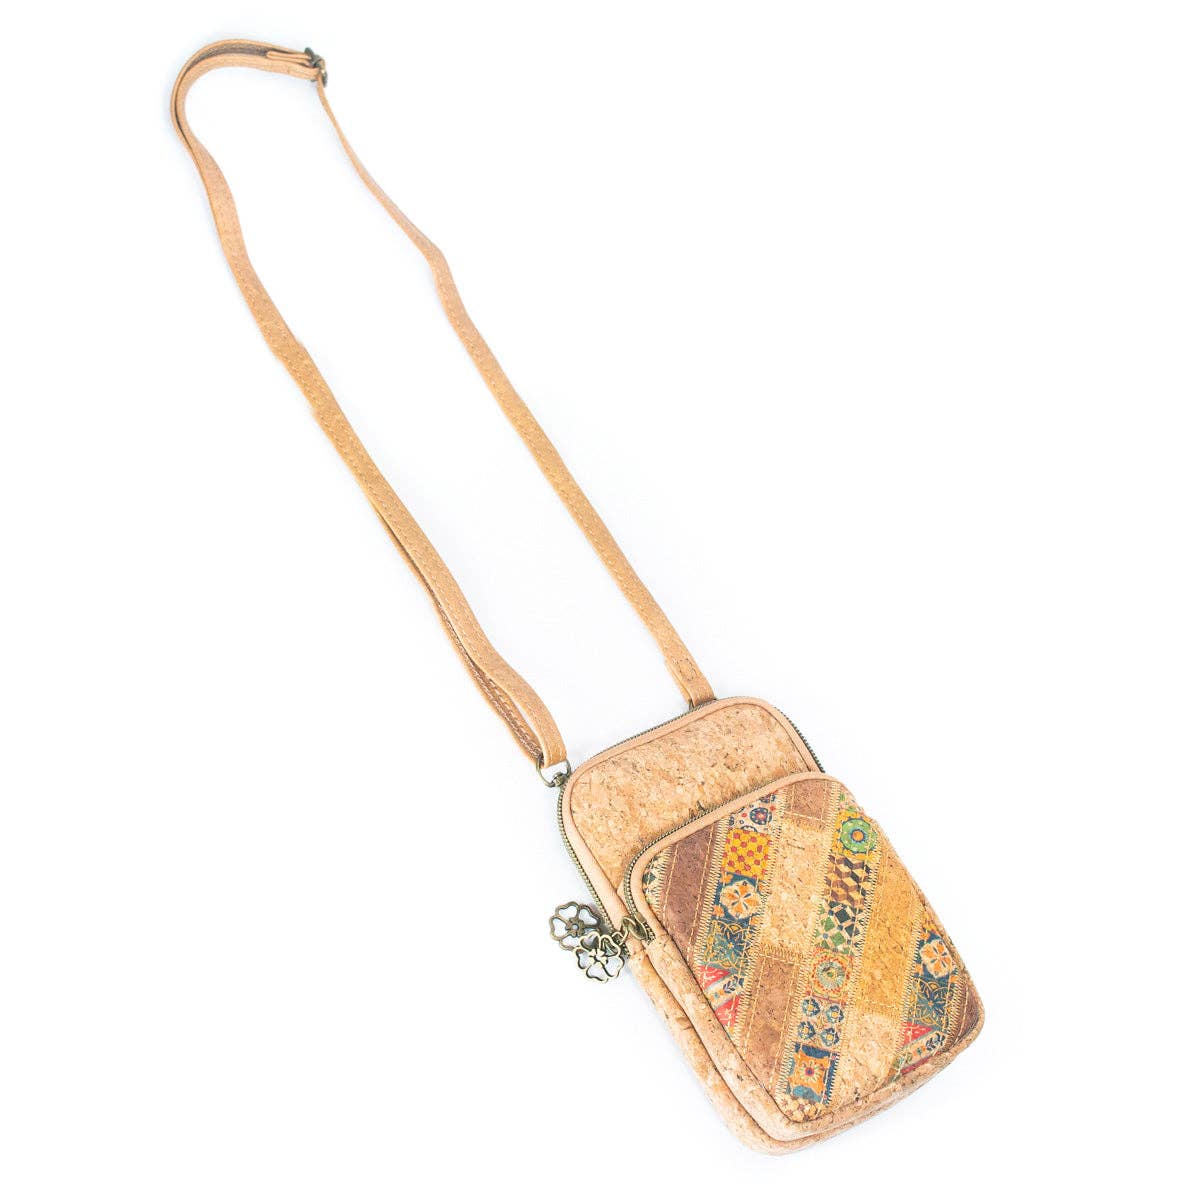 Natural Cork Patchwork Women's Phone Pouch -BAGF-060-A - Texas Cork Company